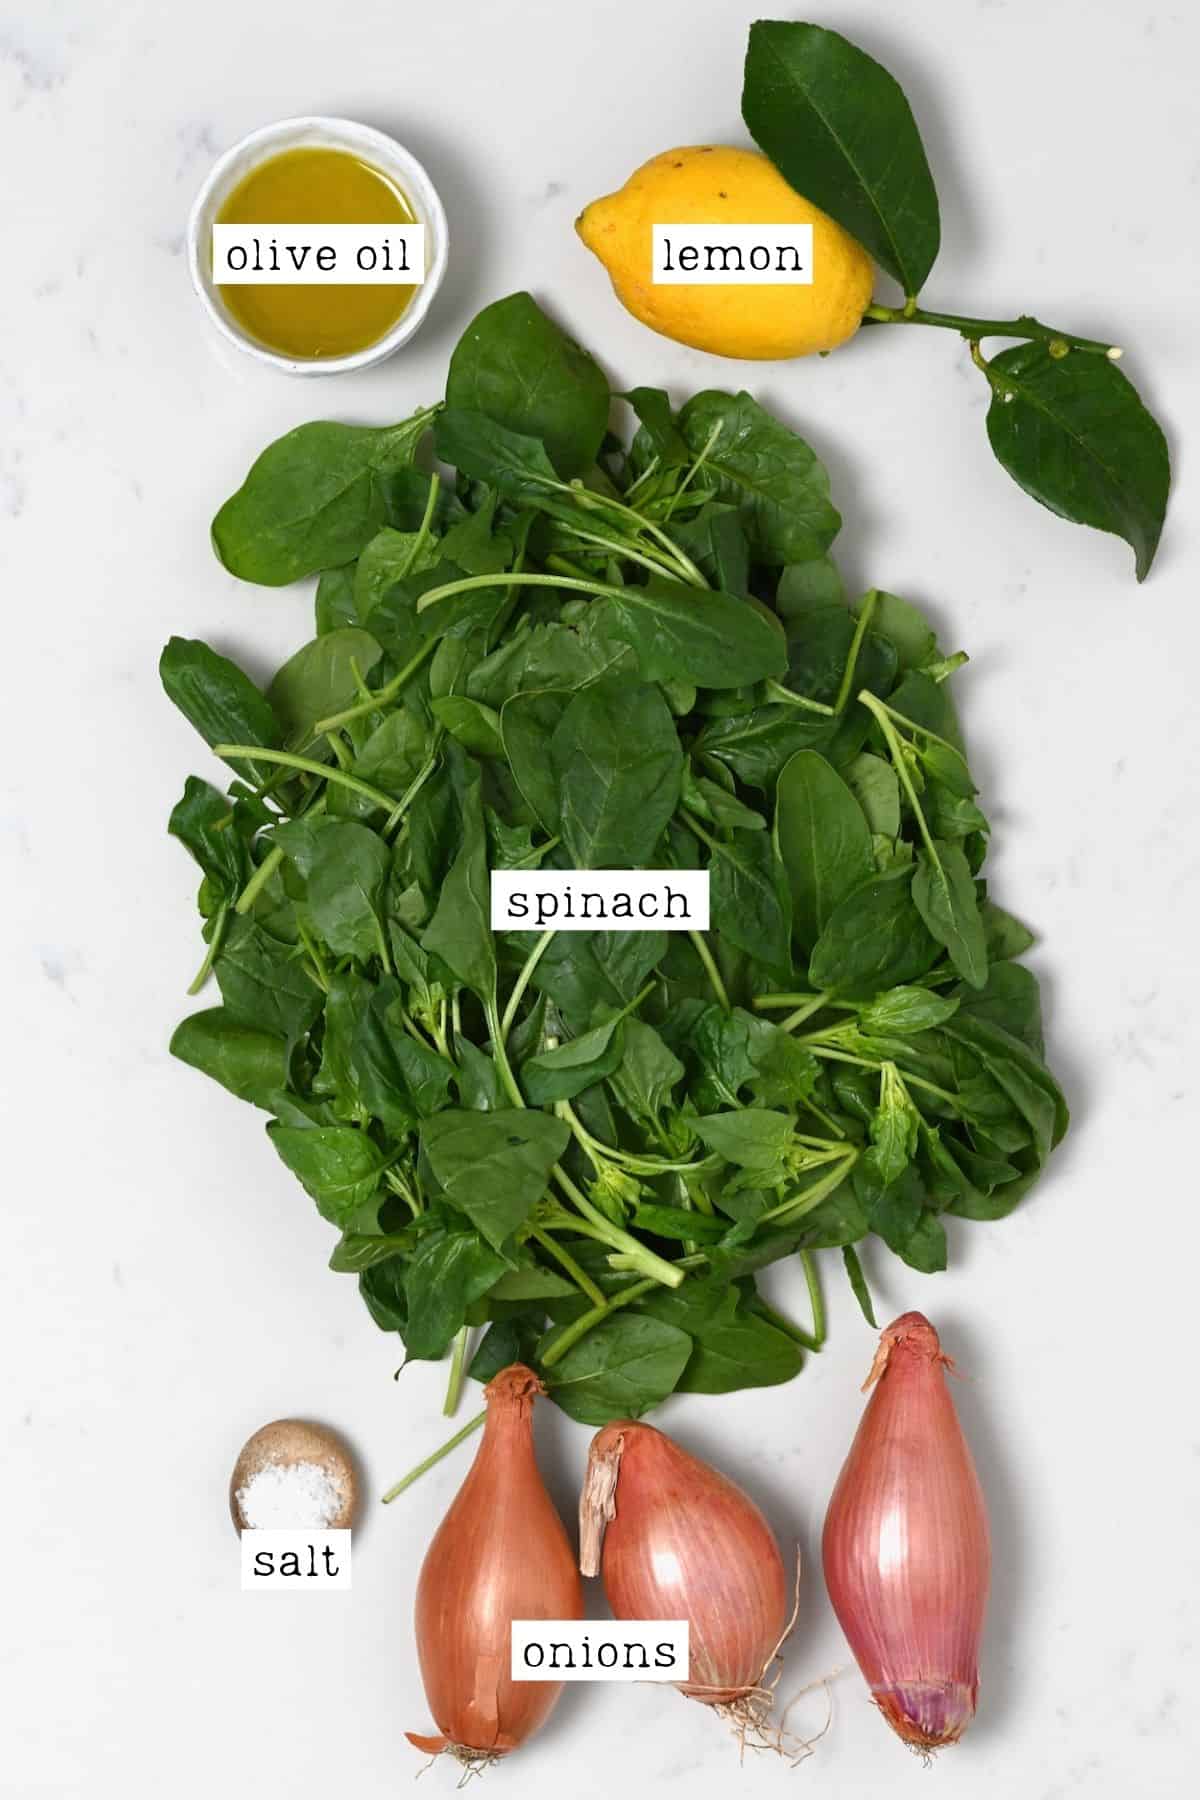 Ingredients for spinach and onions